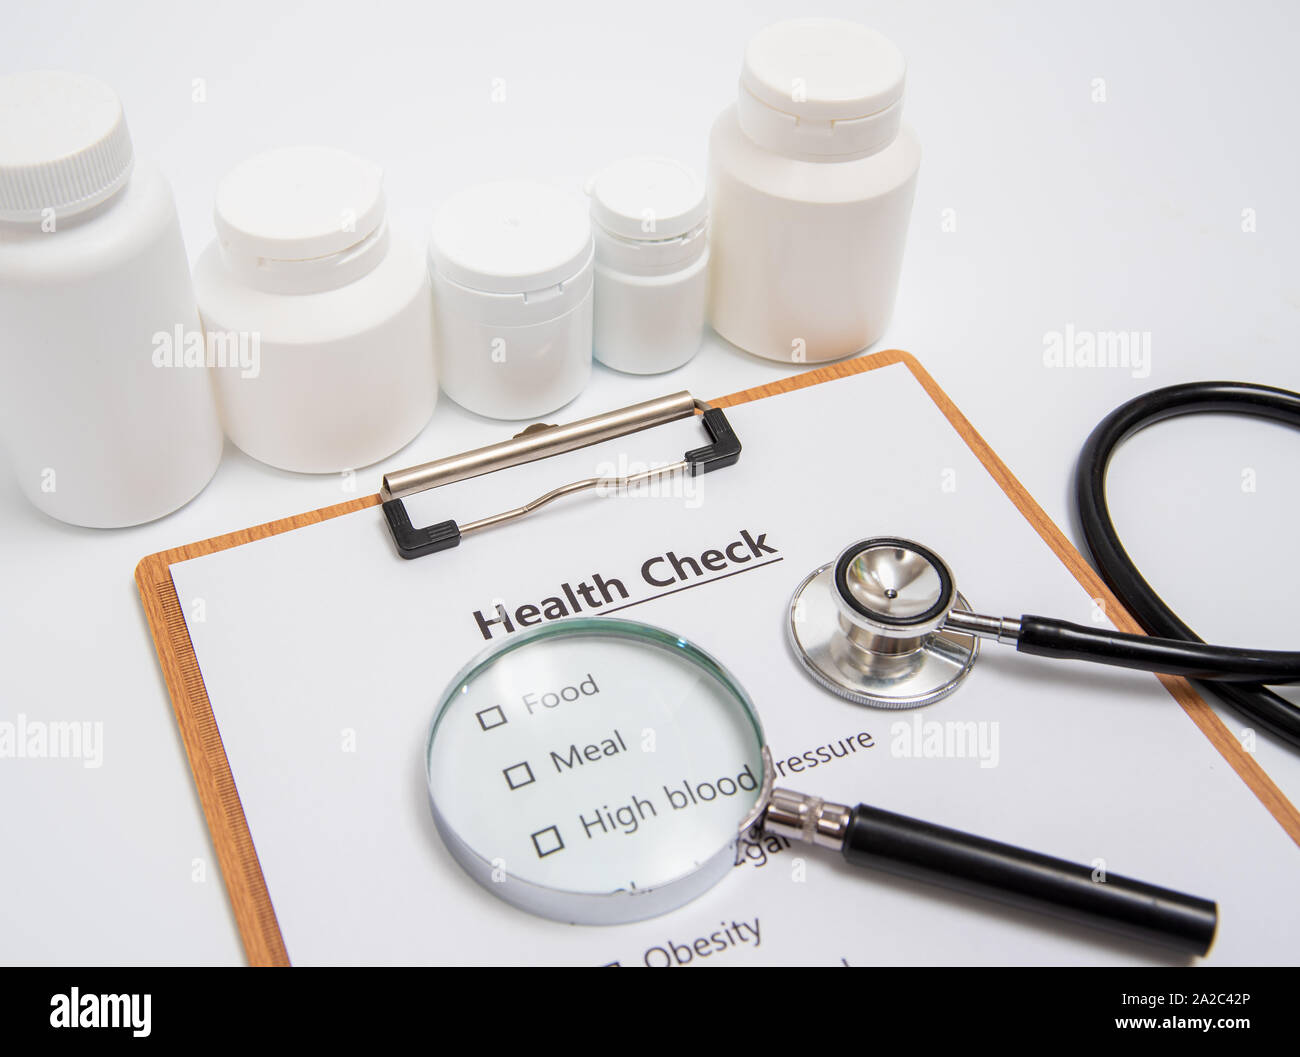 Health concept with clipboard and health check related items. Stock Photo